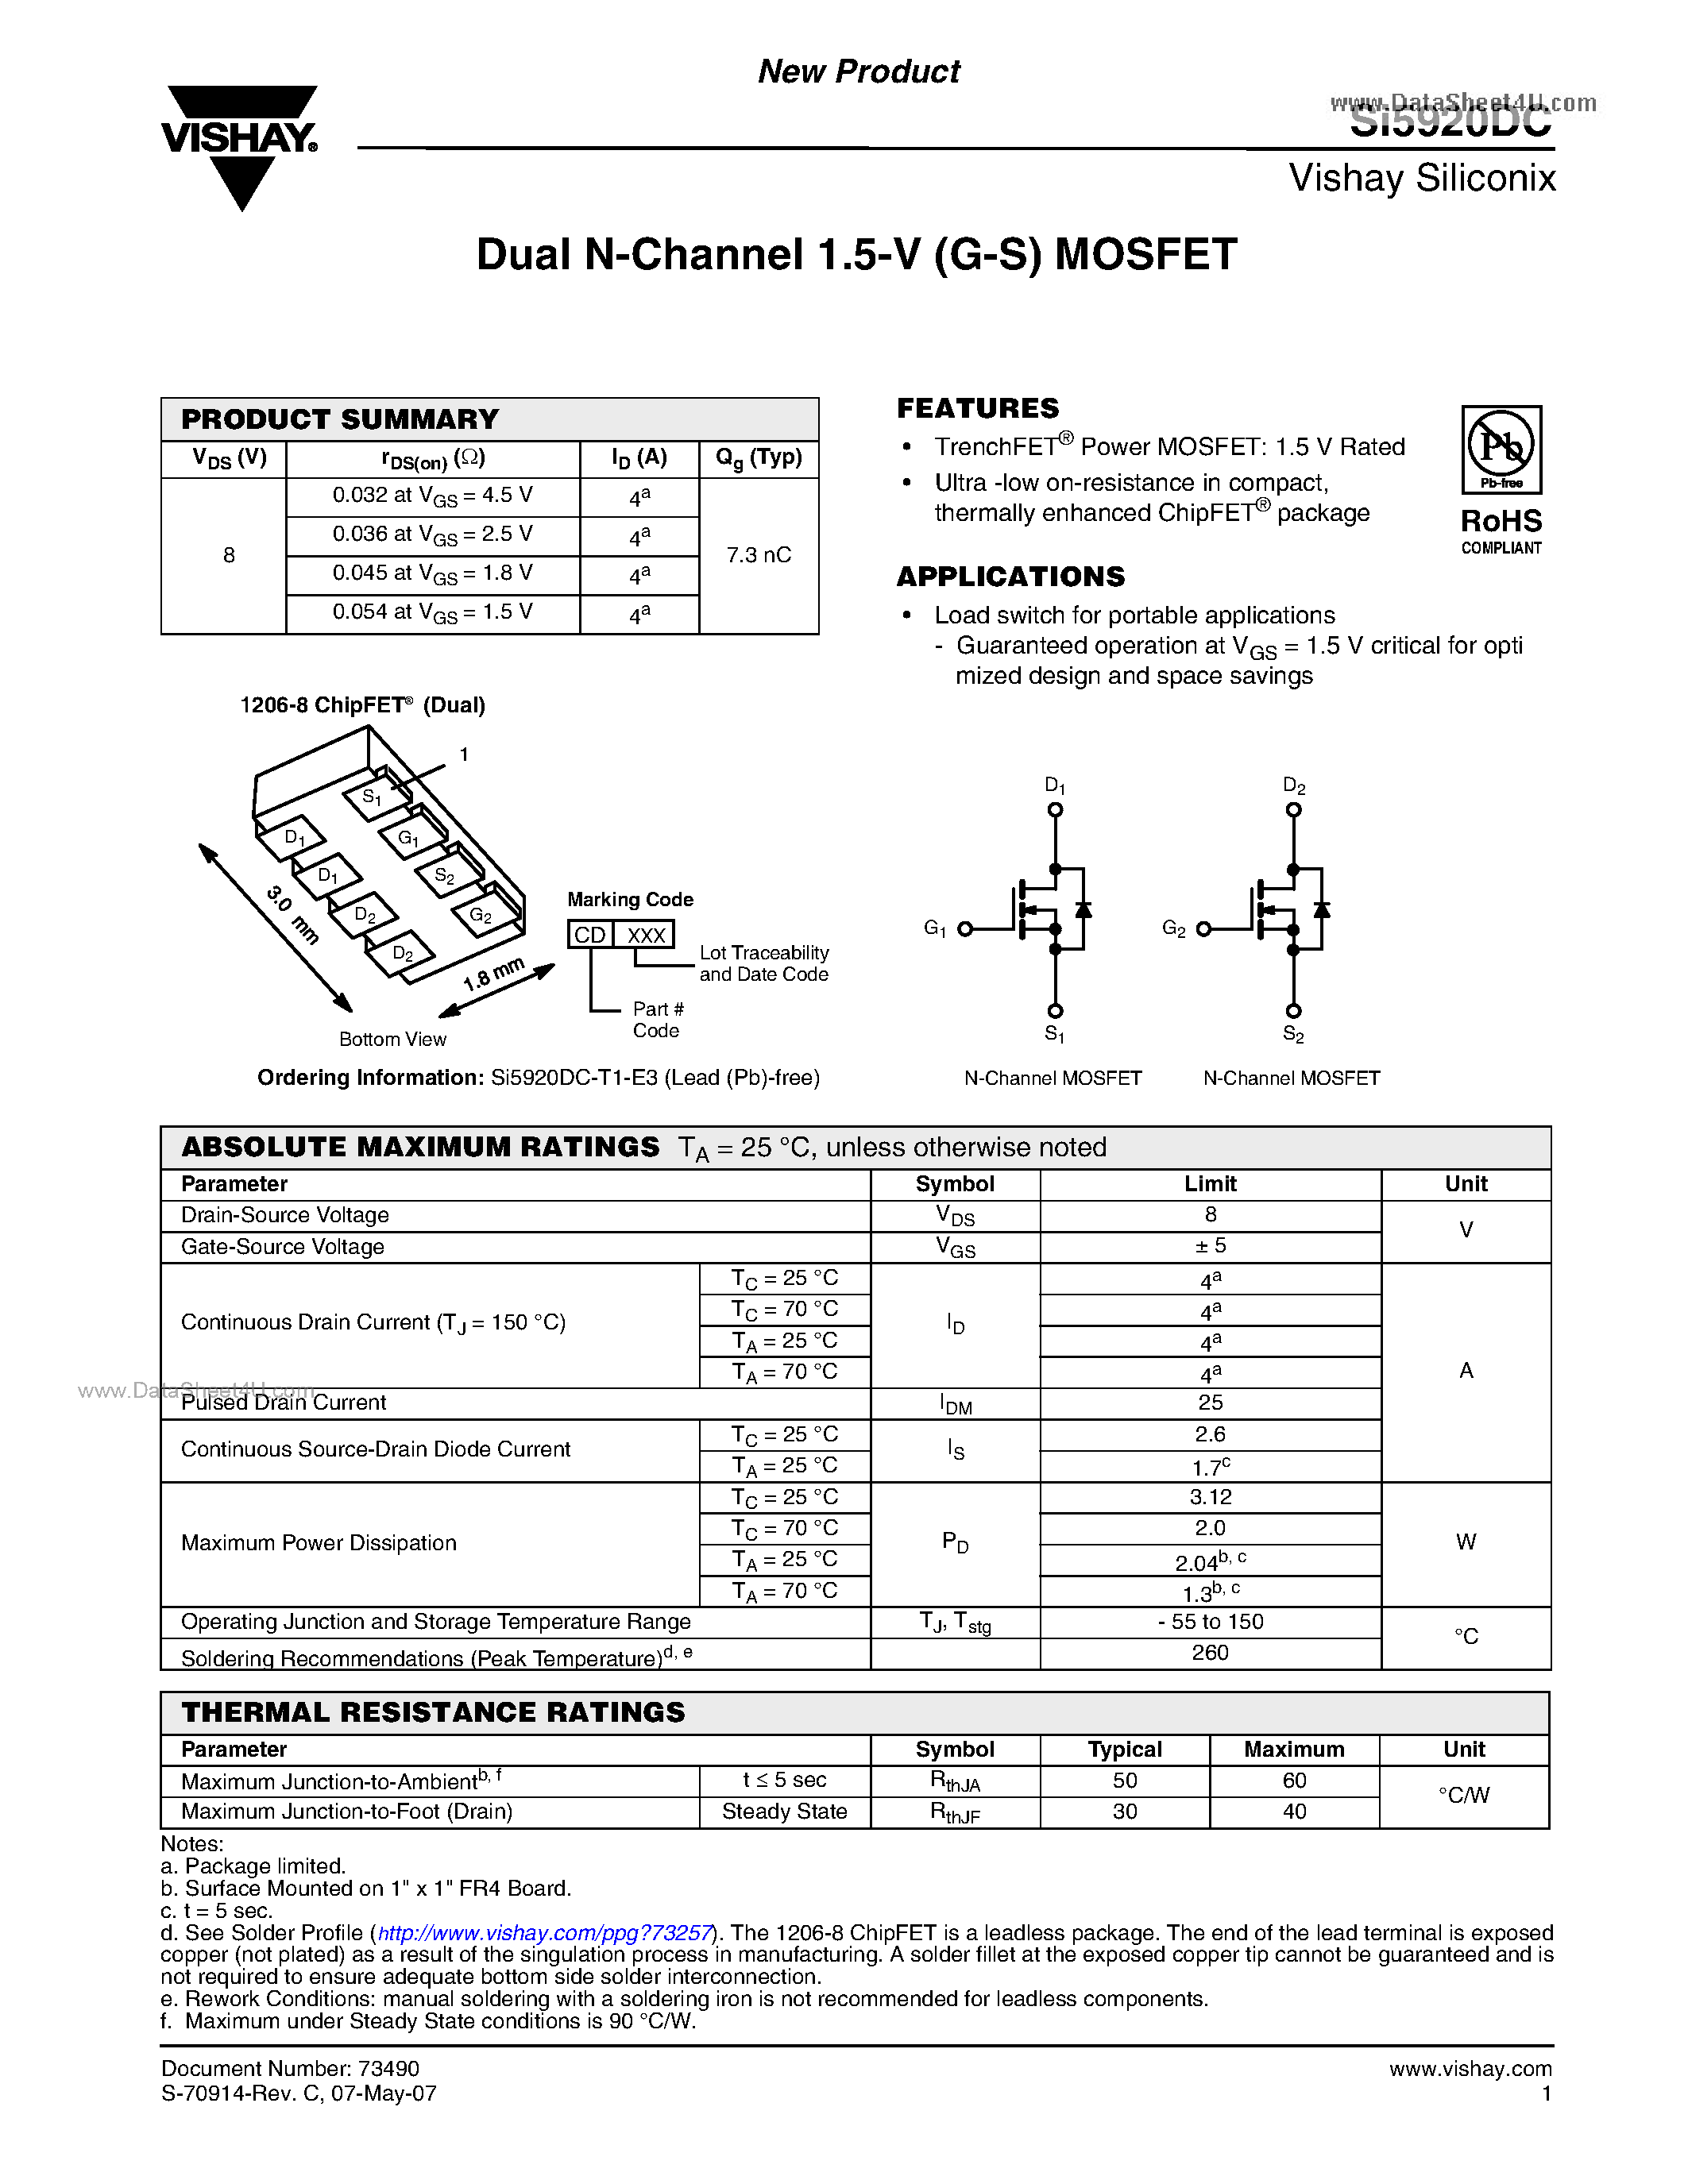 Даташит Si5920DC - Dual N-Channel 1.5-V (G-S) MOSFET страница 1